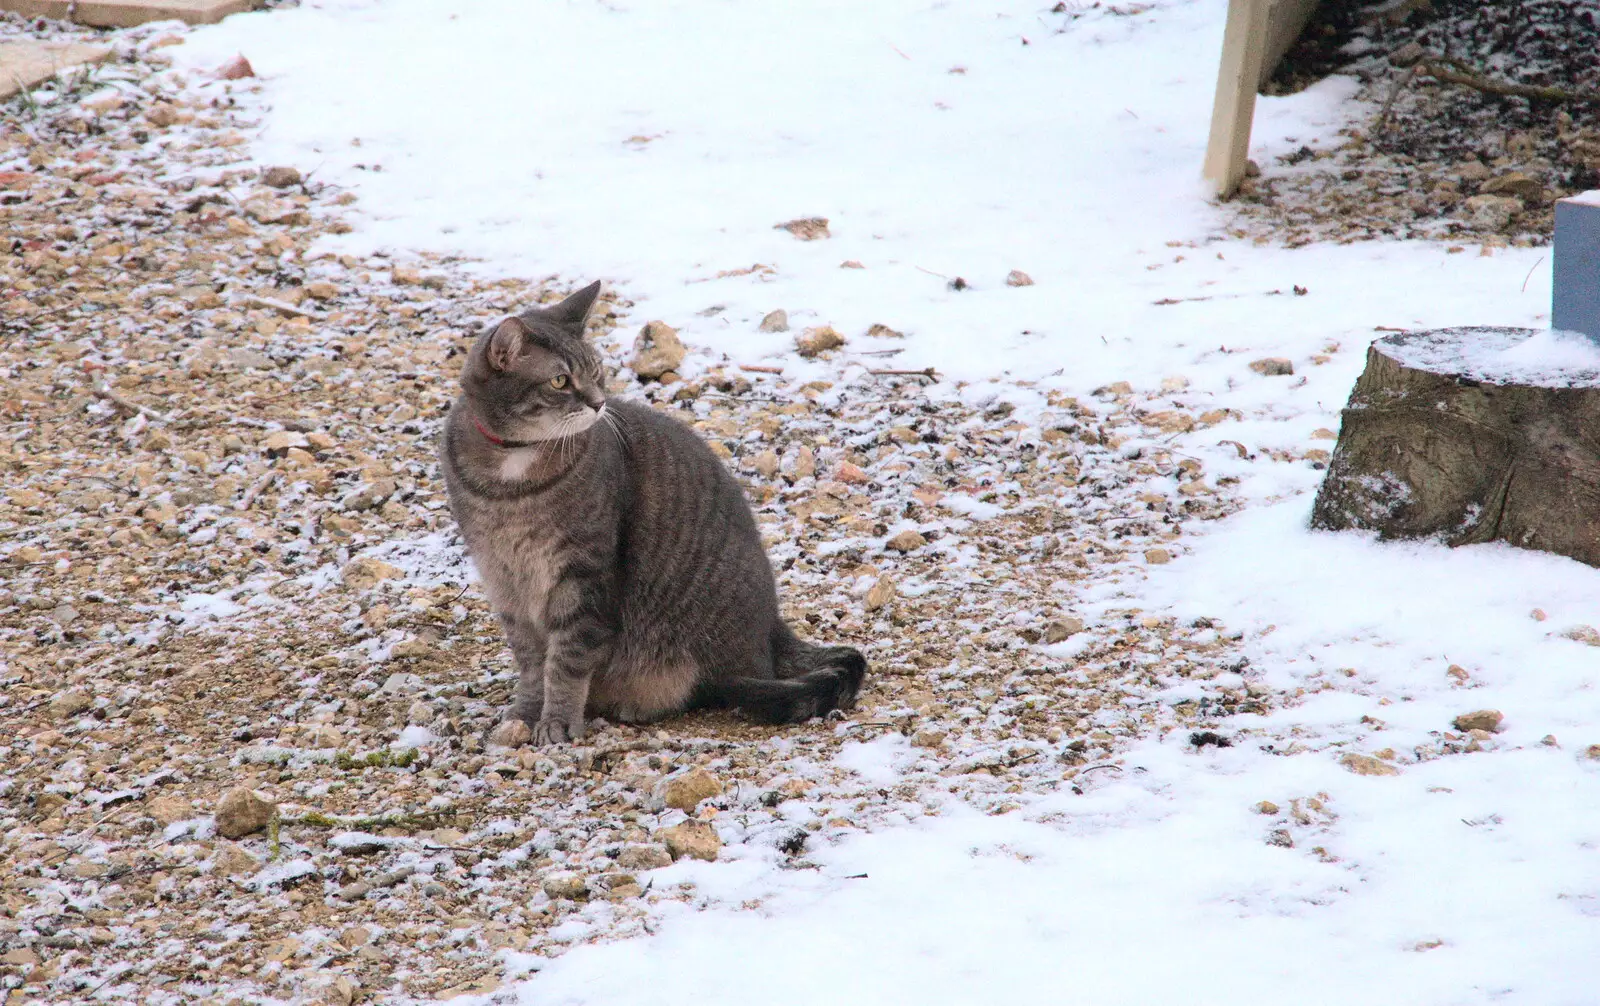 Boris - stripey cat - looks unimpressed, from Snowmageddon: The Beast From the East, Suffolk and London - 27th February 2018